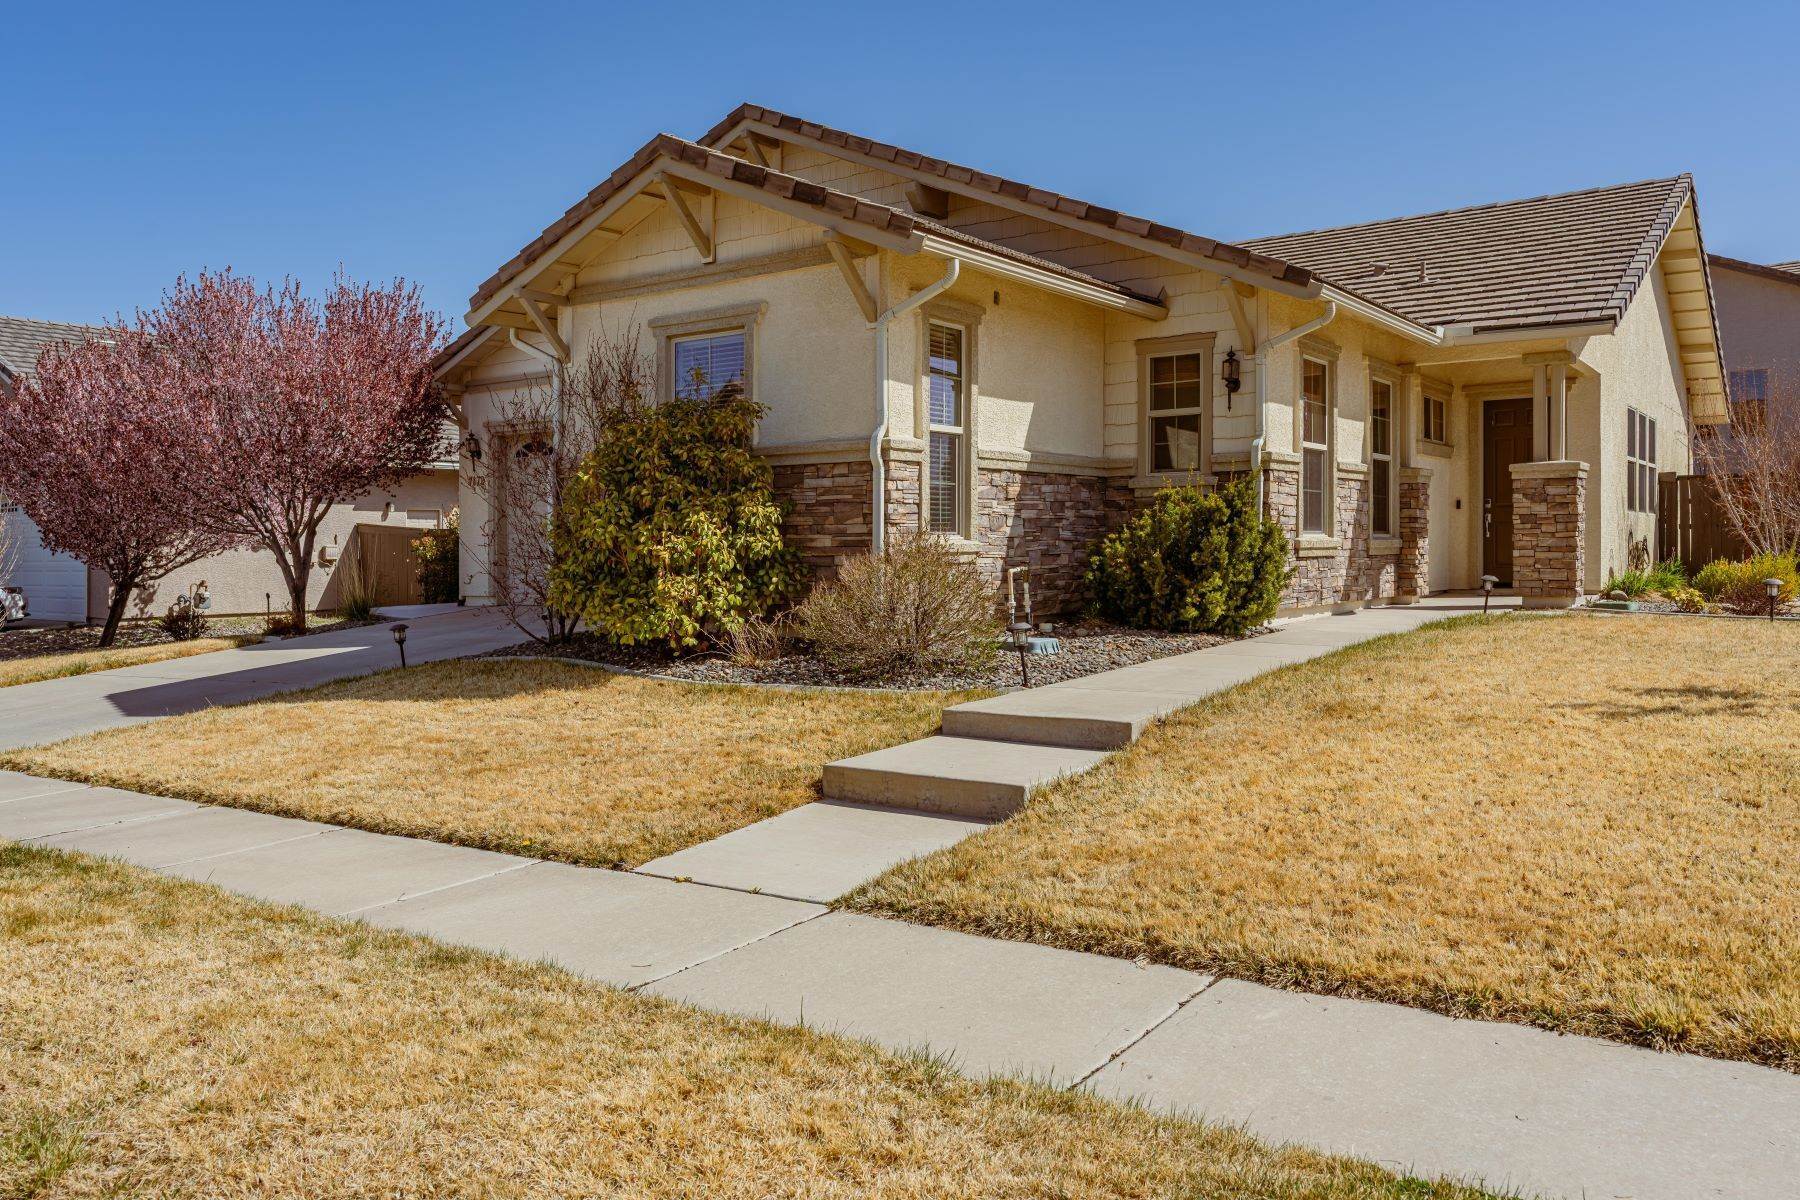 Single Family Homes for Active at Inviting Single Level Home 7172 Rutherford Dr Reno, Nevada 89506 United States